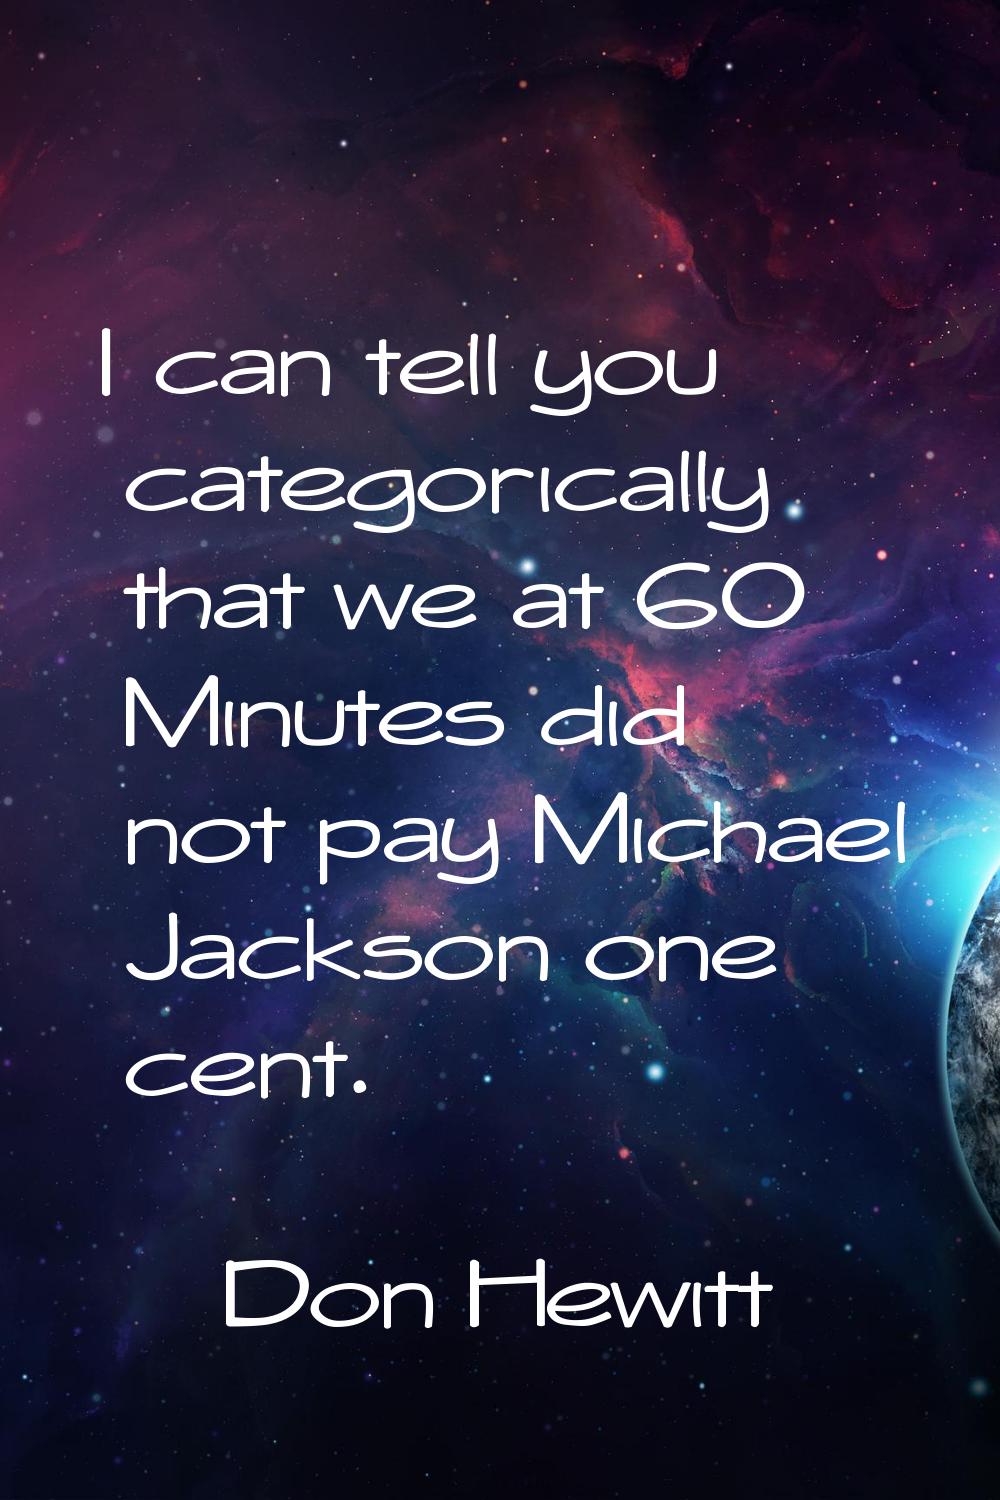 I can tell you categorically that we at 60 Minutes did not pay Michael Jackson one cent.